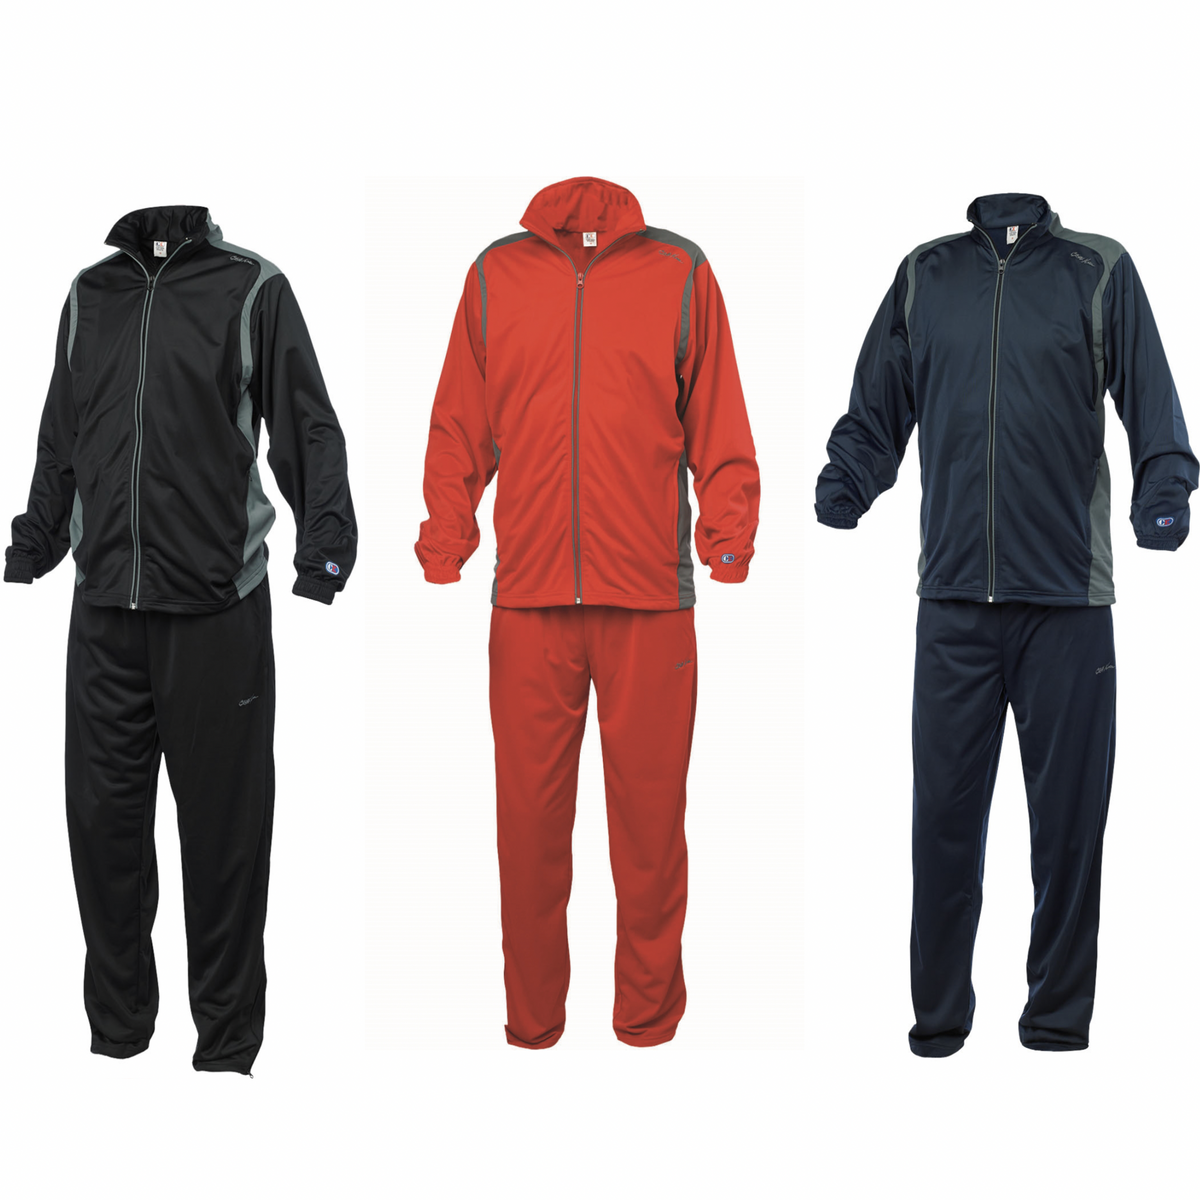 Cliff Keen | WS7593 | The Podium Stock Warmup Suit | Wrestlers